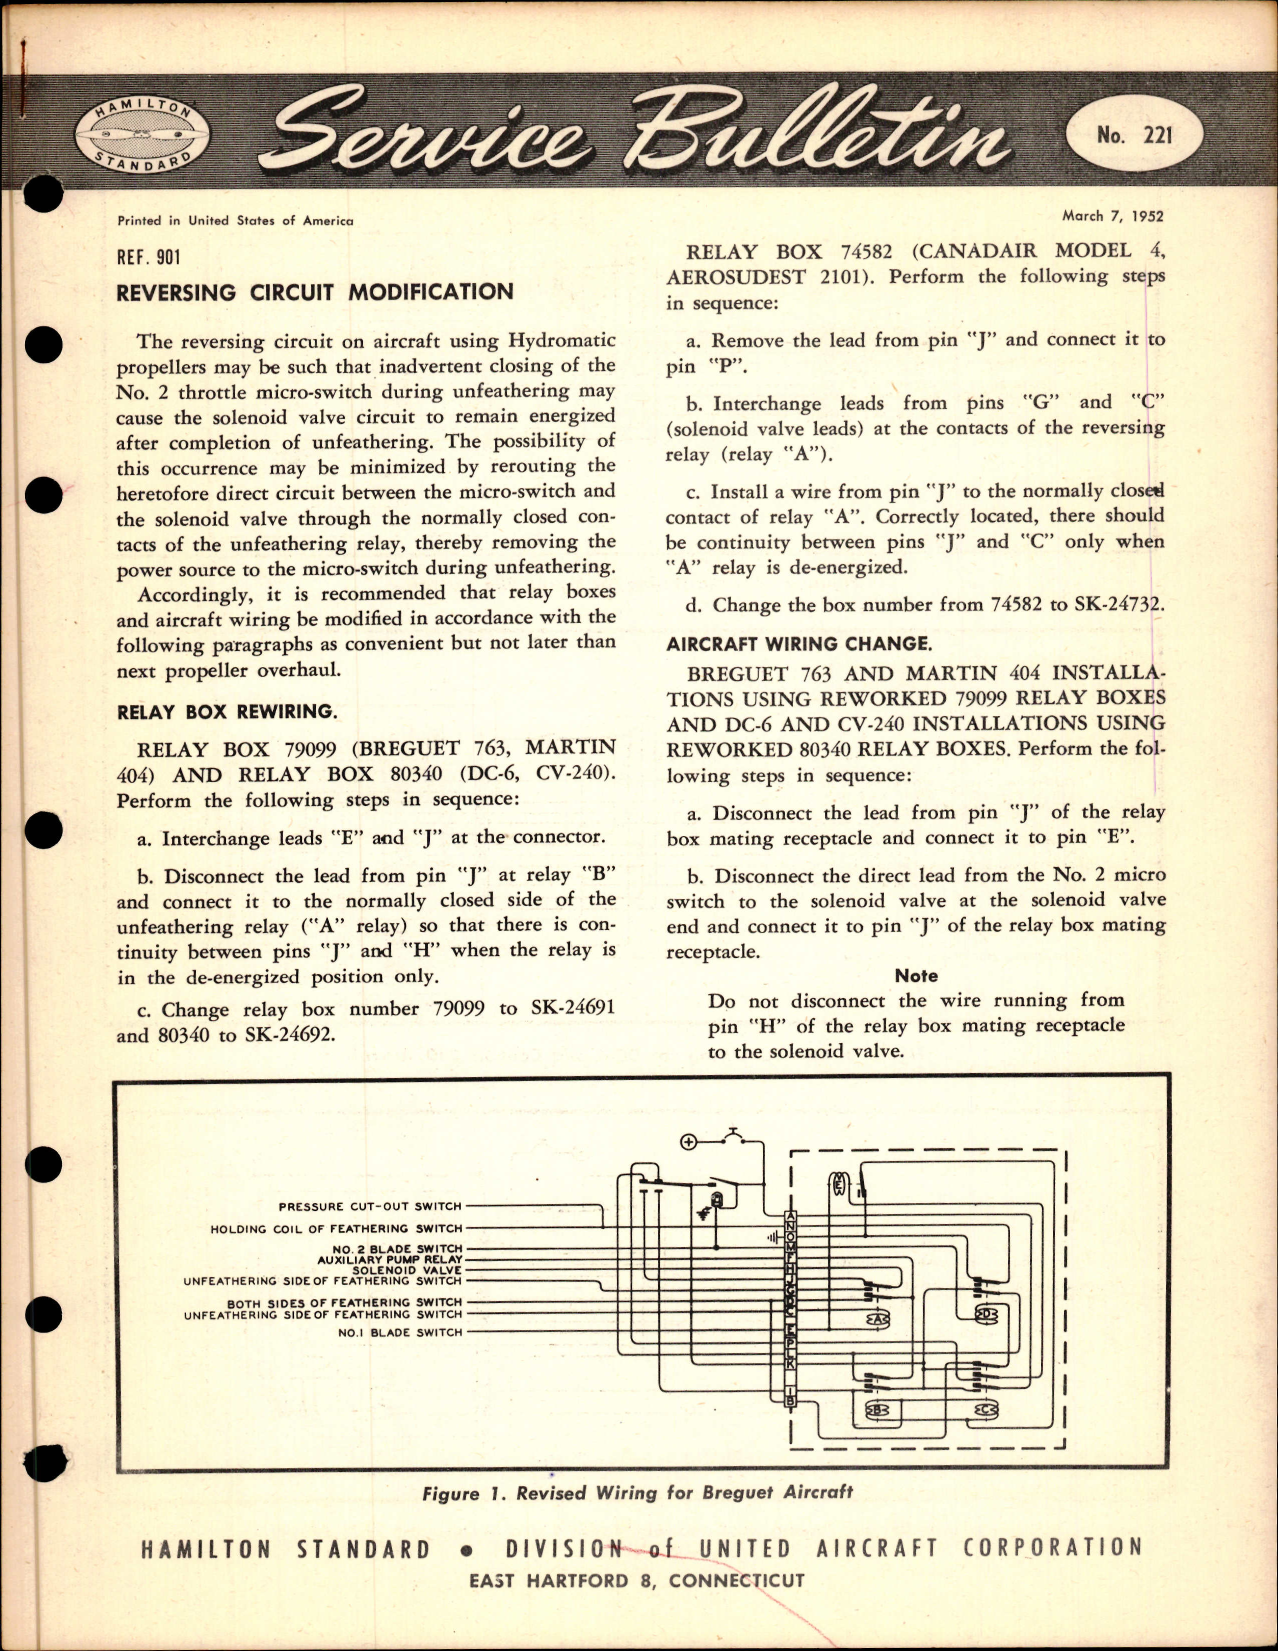 Sample page 1 from AirCorps Library document: Reversing Circuit Modification, Ref 901